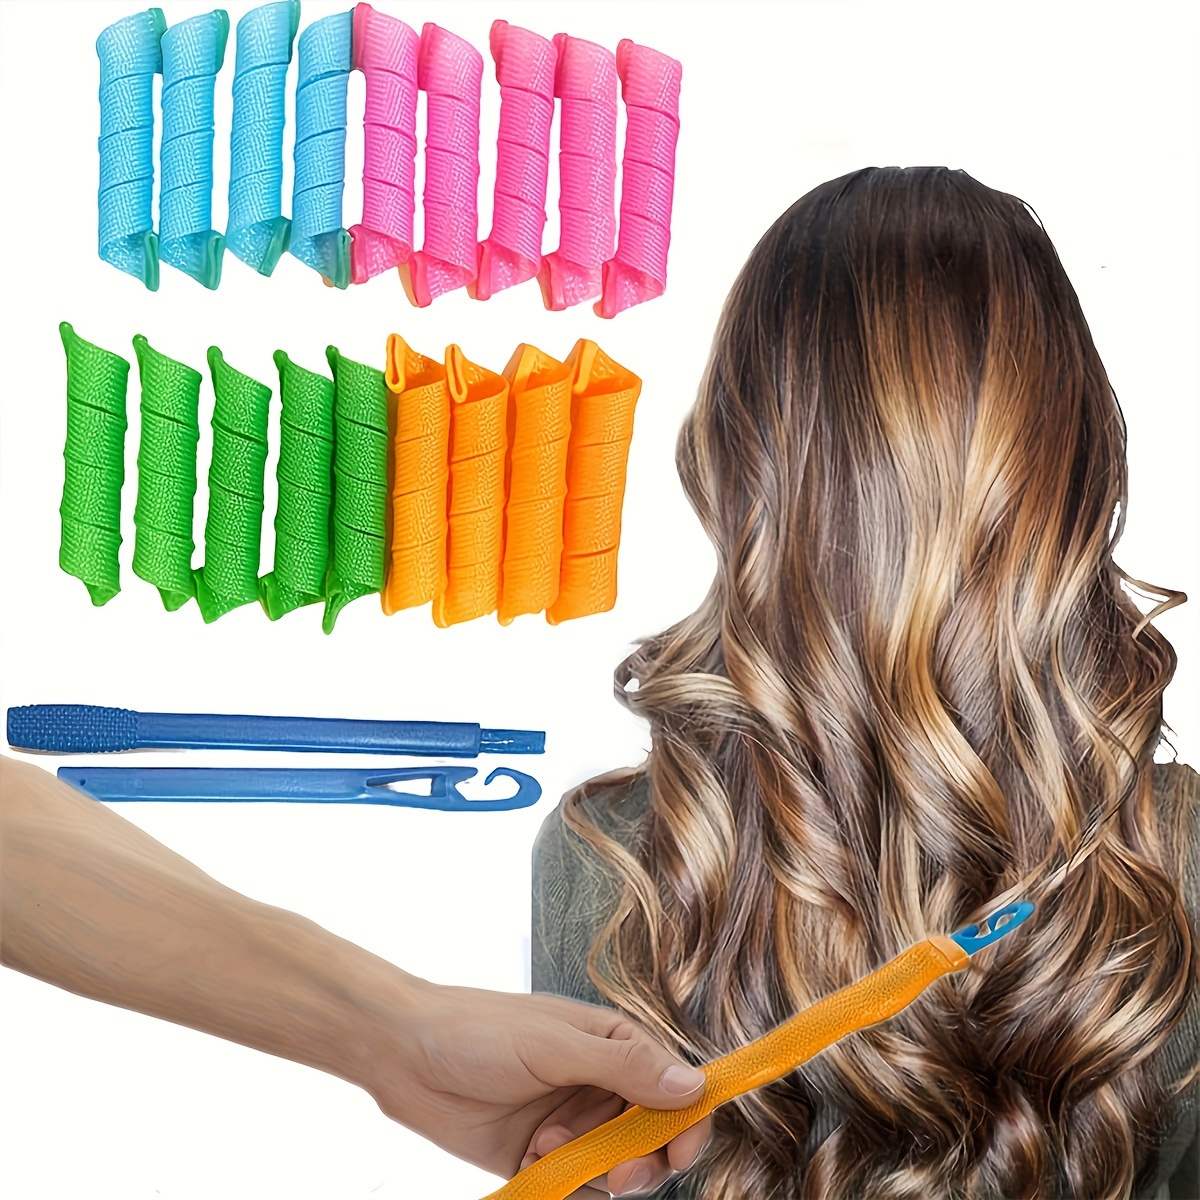 

18pcs Spiral Hair Curlers, Diy Magic Hair Roller Set With Styling Hook, Portable Wavy Hair Curling Iron, Hairdressing Tools Kit For Salon And Home Use